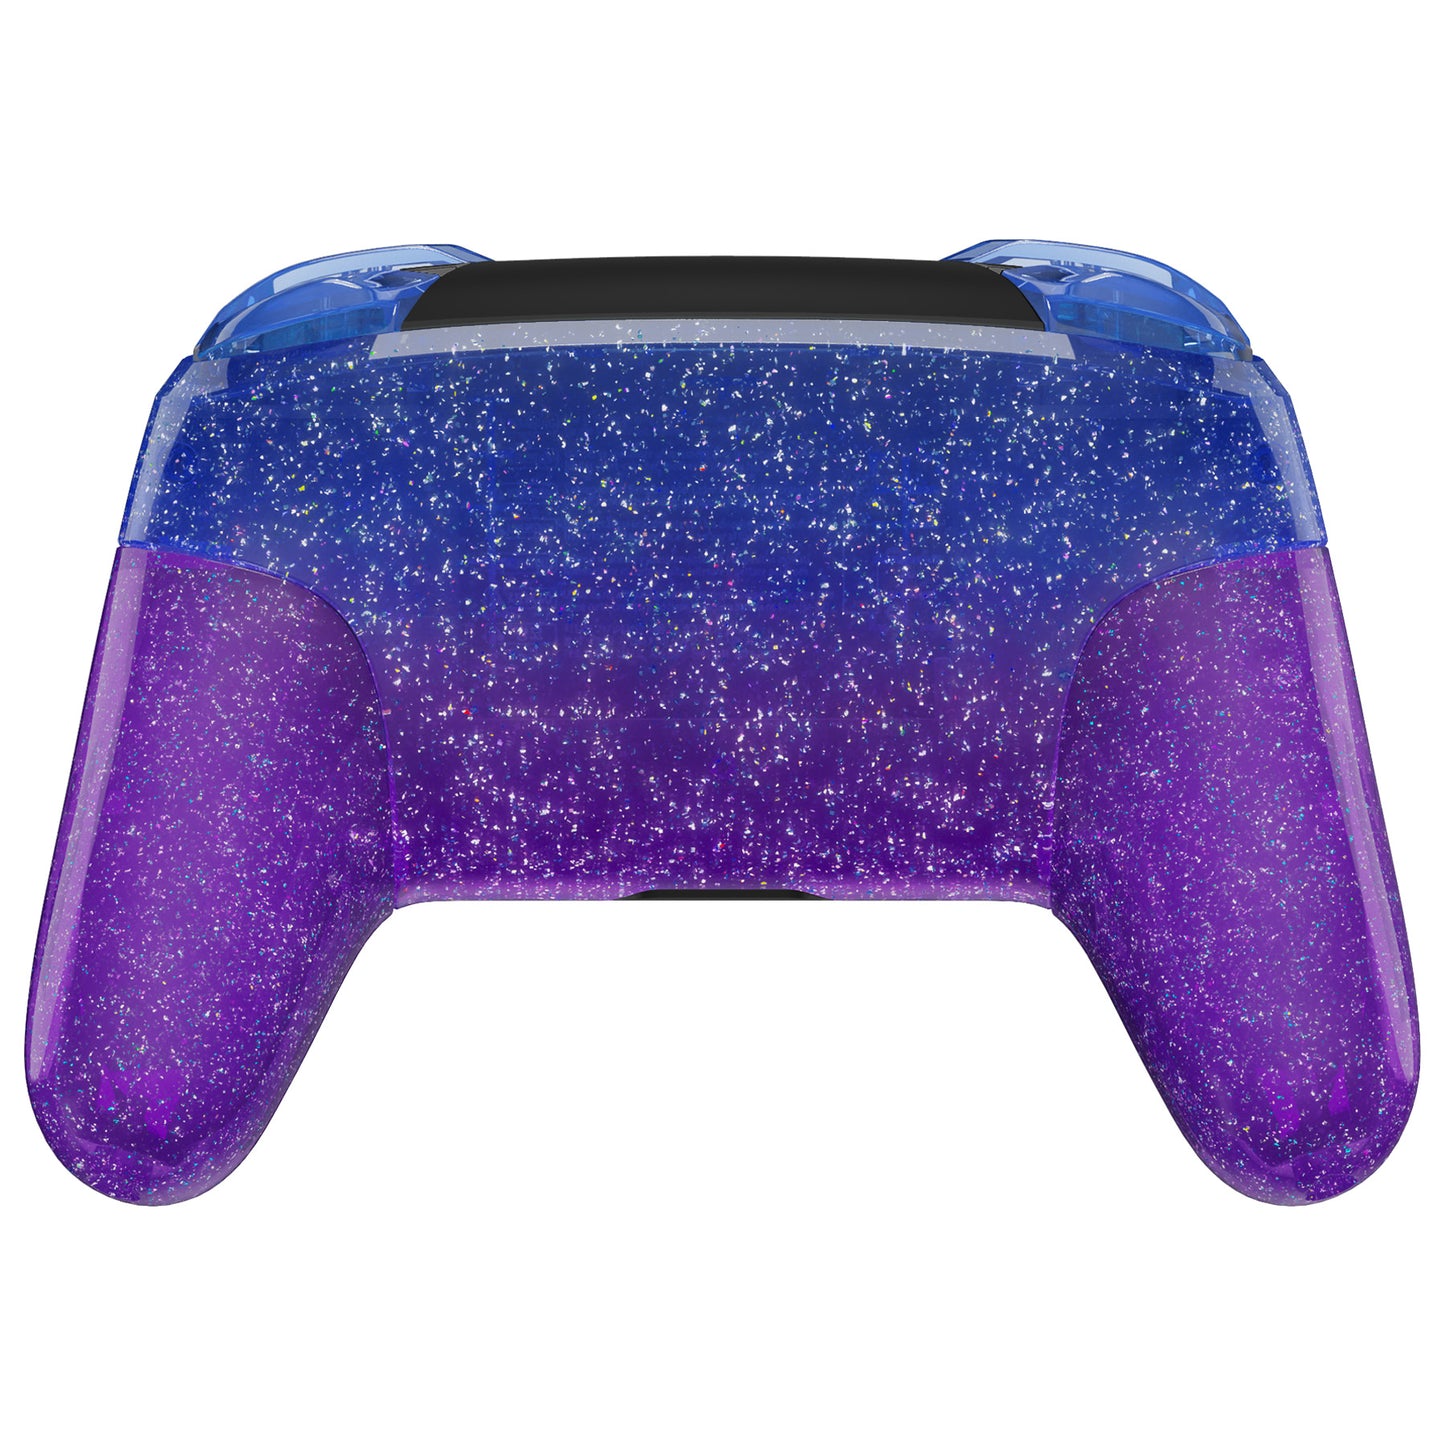 eXtremeRate Replacement Full Set Shell Faceplate Backplate Handles with Button Kit for Nintendo Switch Pro - Glitter Gradient Translucent Bluebell eXtremeRate